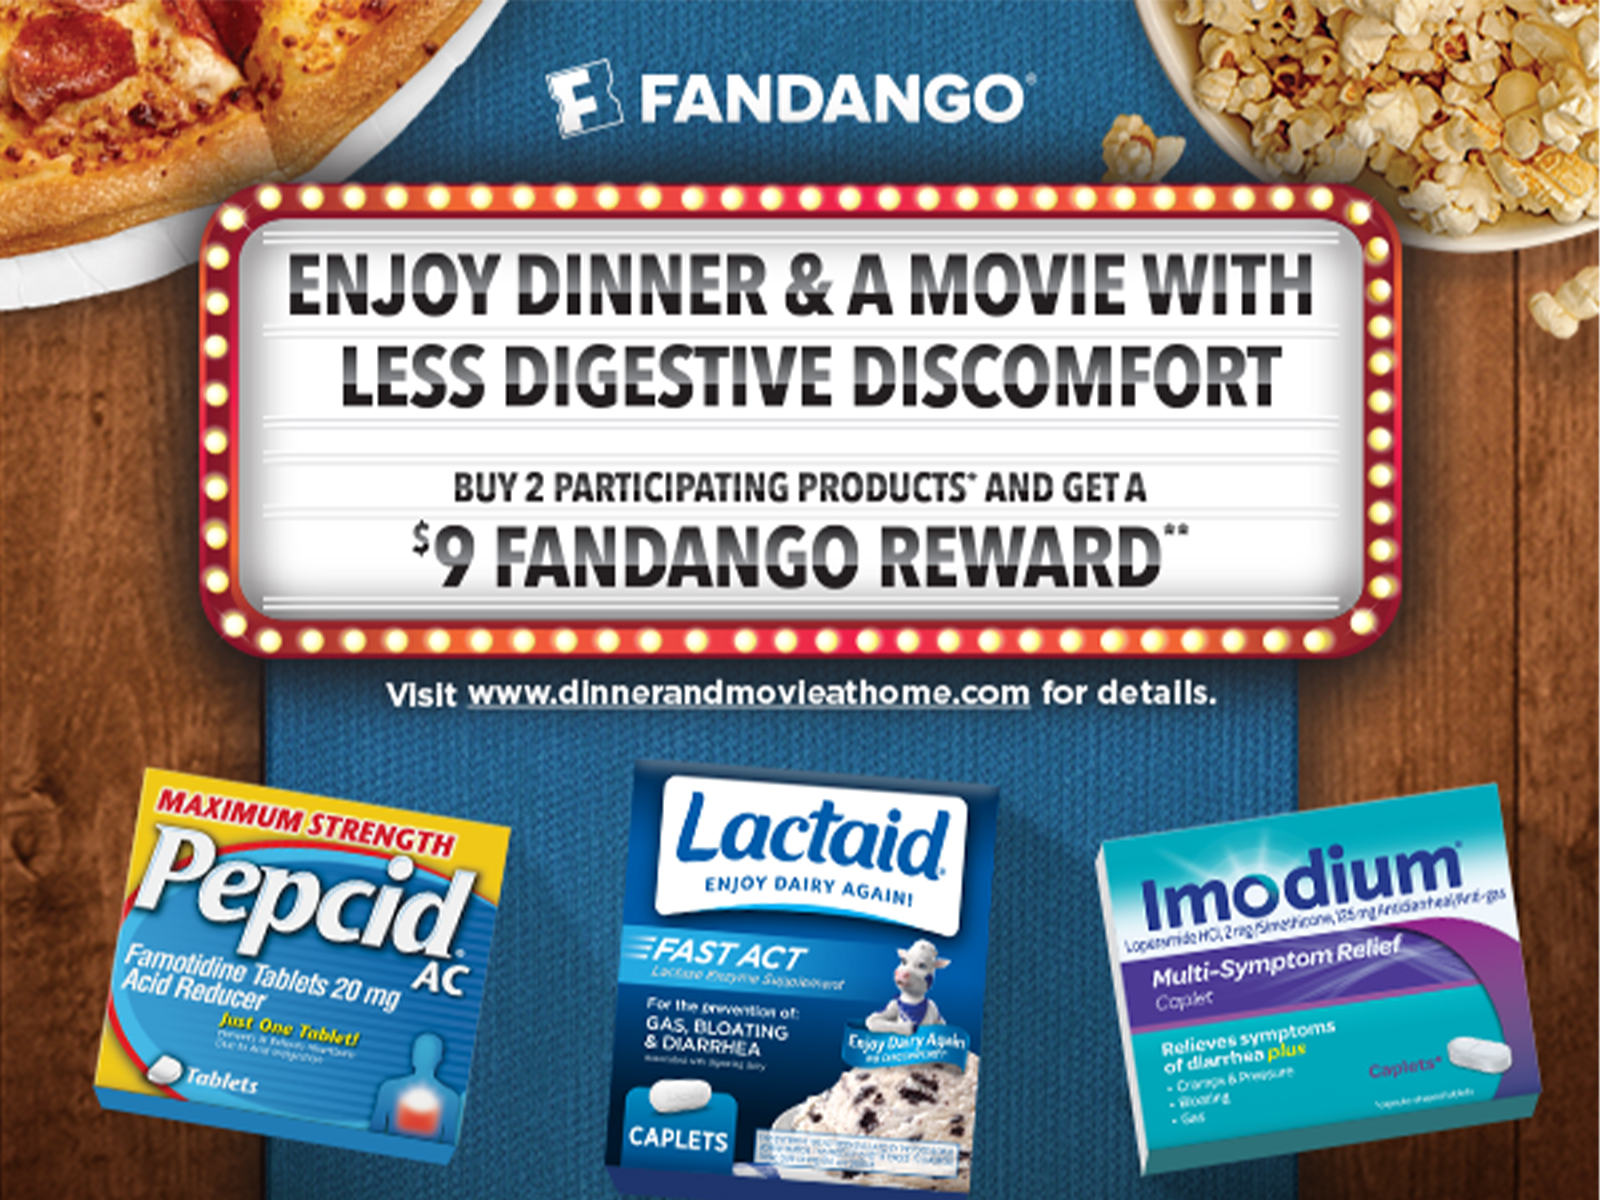 Still Time To Get A $9 Fandango Reward With The Purchase Of Two Pepcid, Lactaid Or Imodium Products!